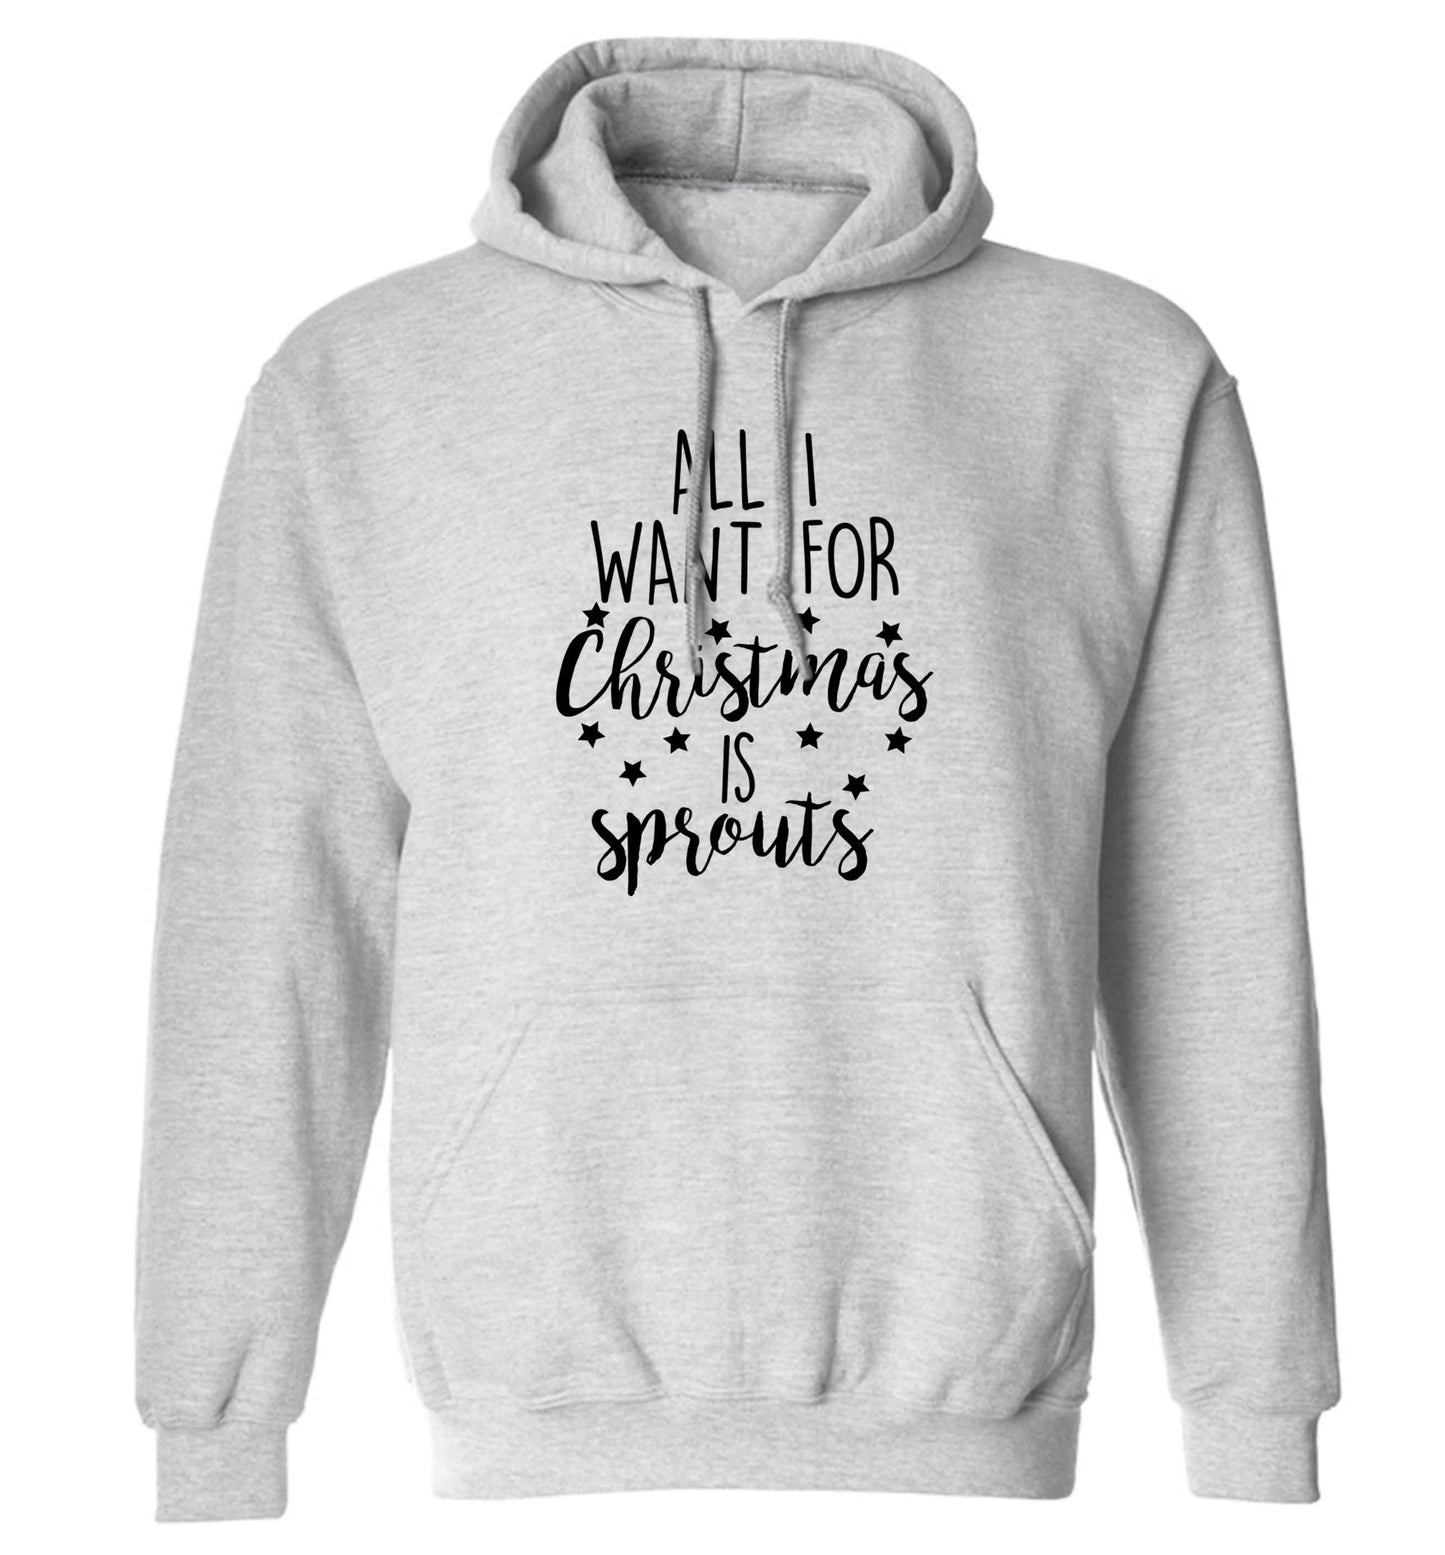 All I want for Christmas is sprouts adults unisex grey hoodie 2XL